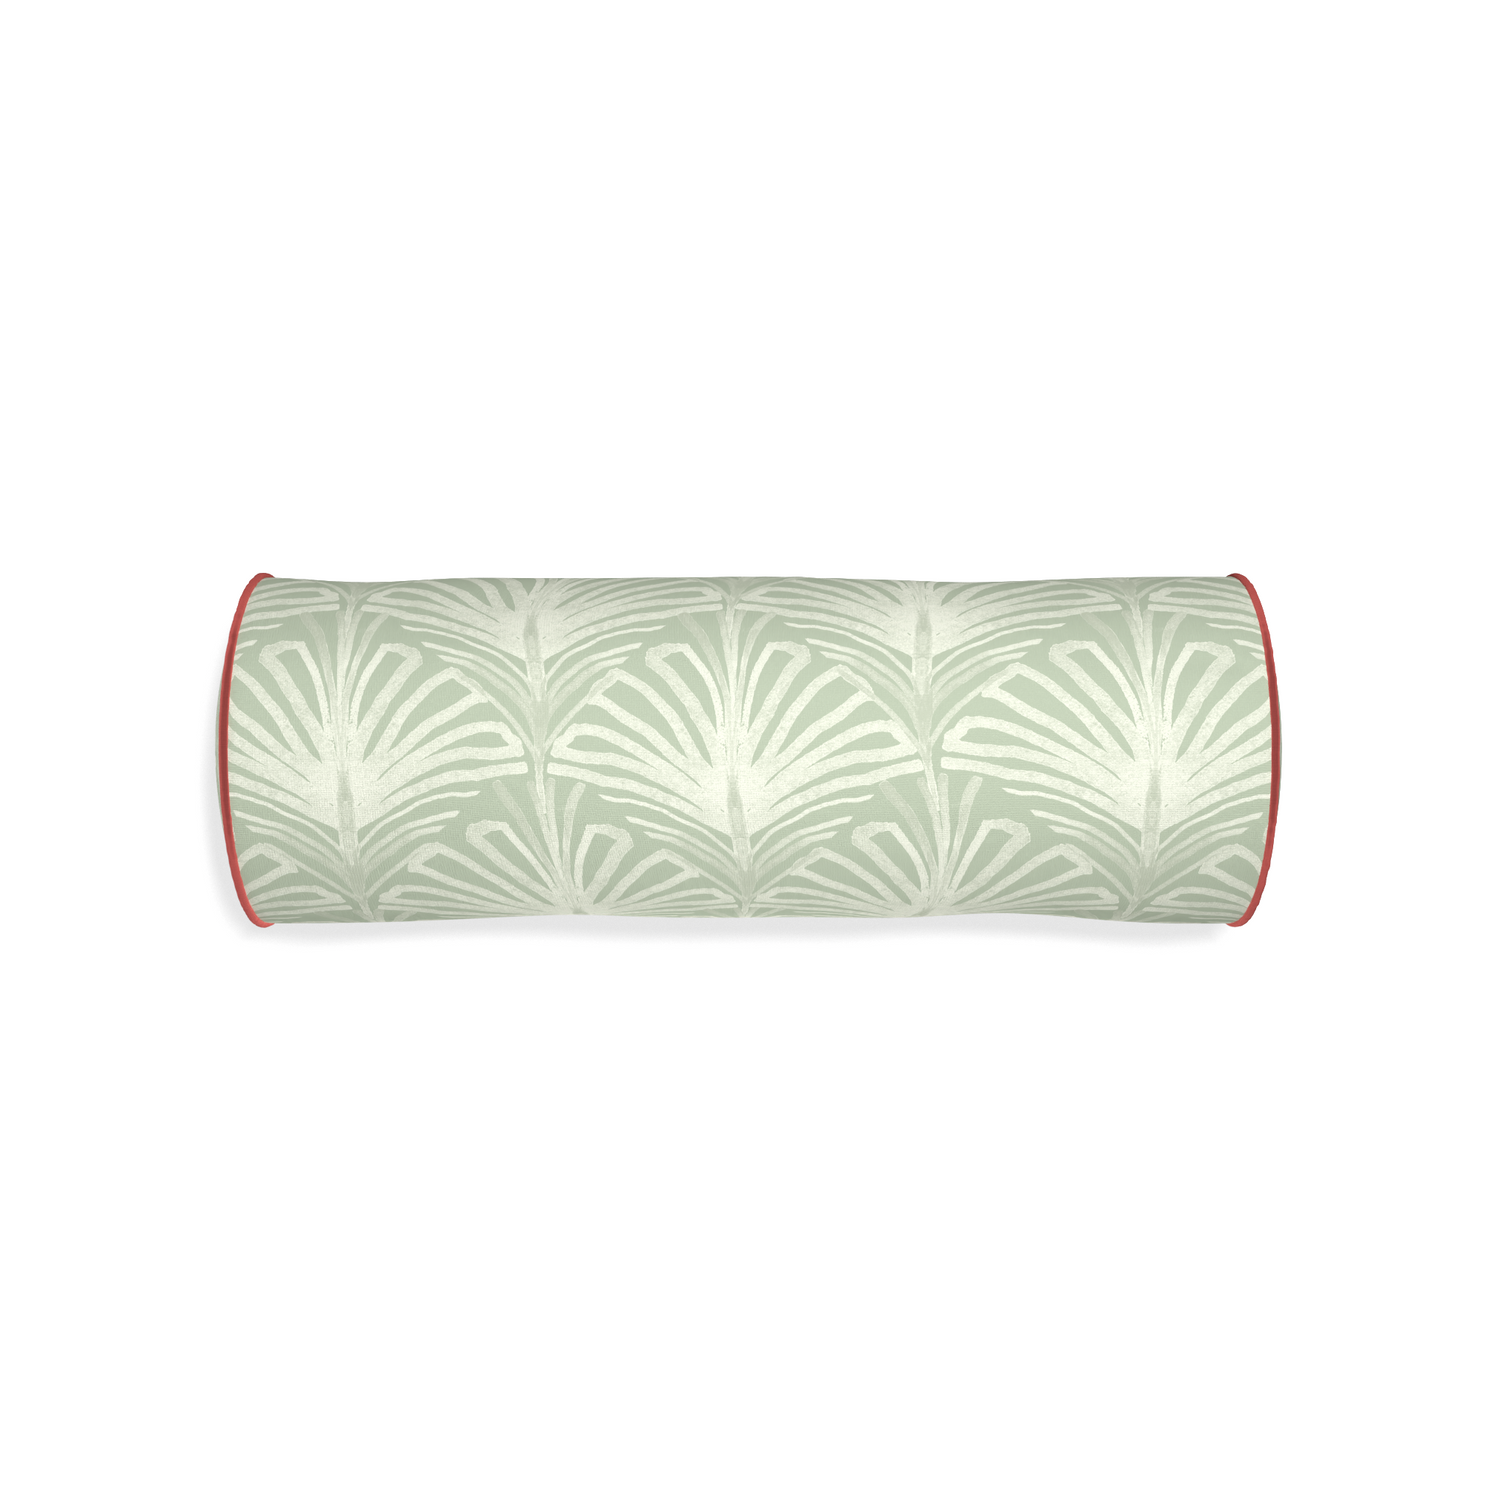 Bolster suzy sage custom sage green palmpillow with c piping on white background